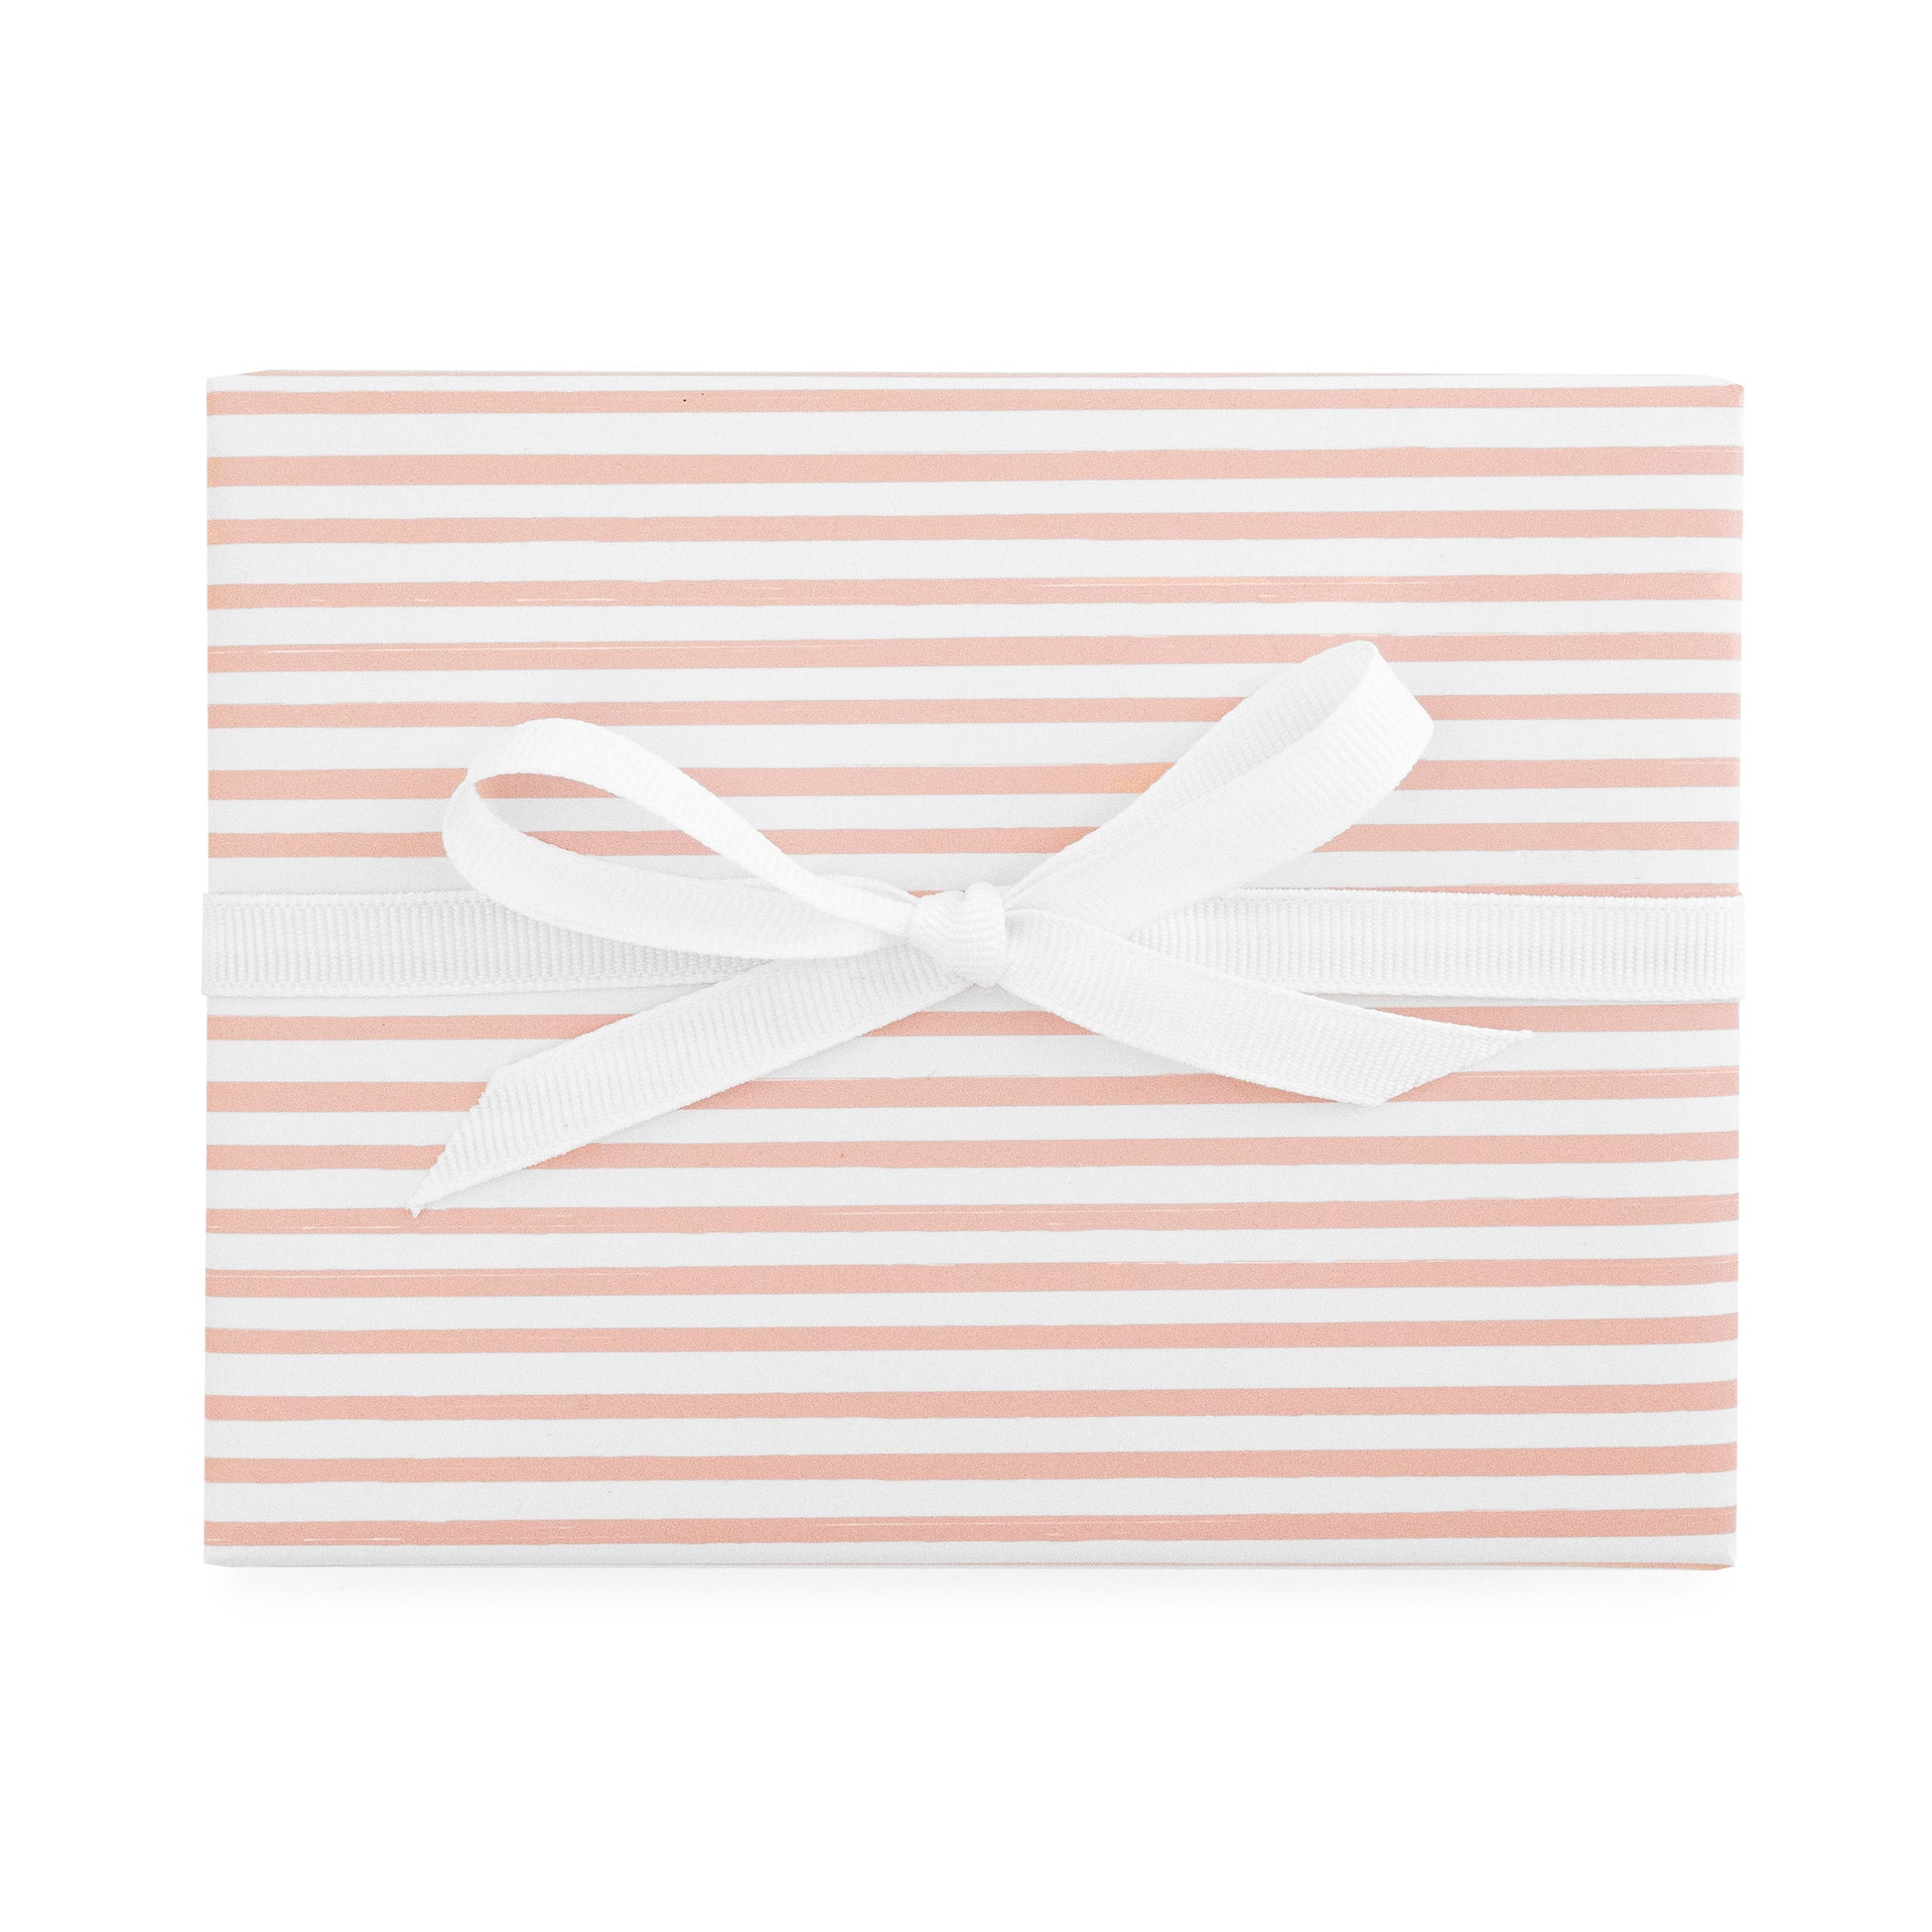 CLEARANCE Glossy Child Silhouette Gift Wrapping Paper